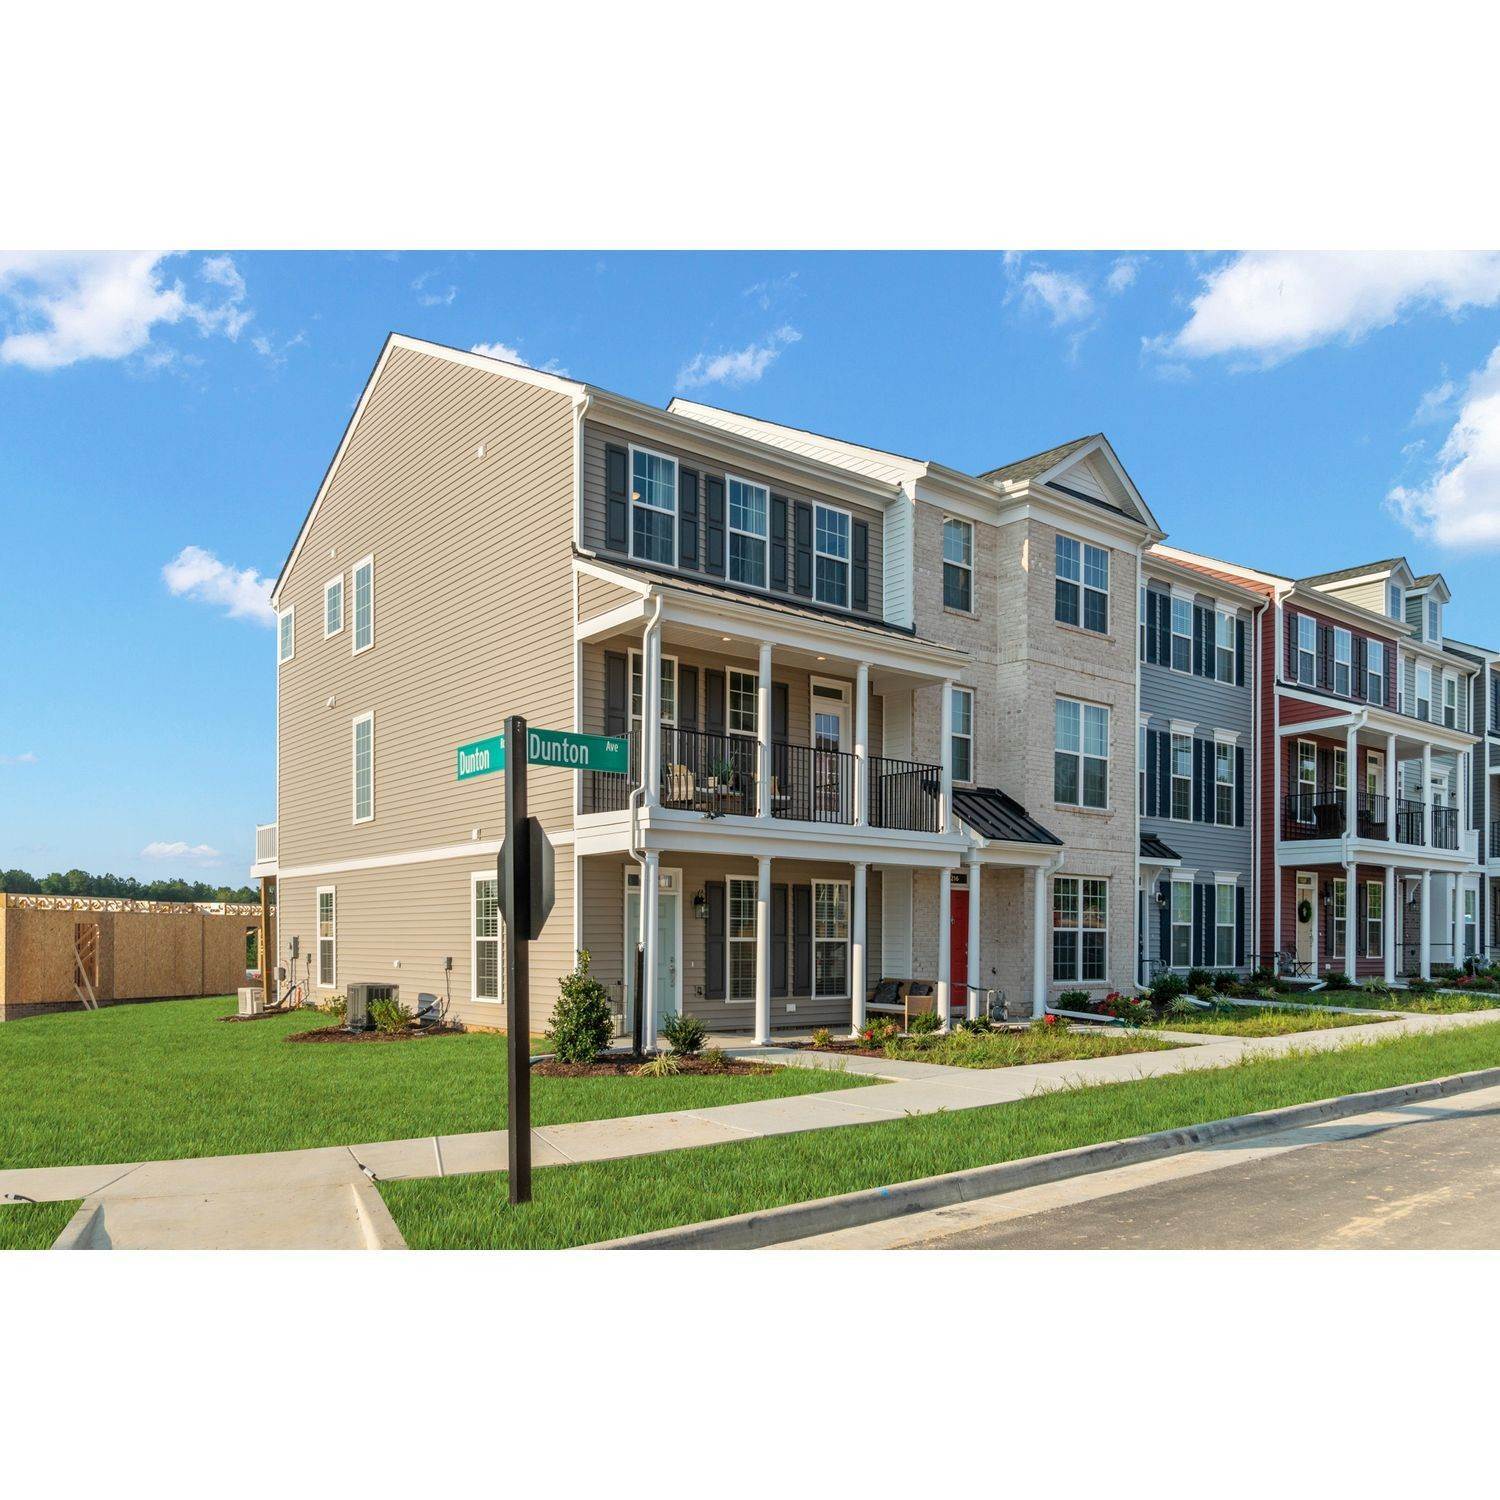 Cosby Village 3-Story Townhomes xây dựng tại 15220 Dunton Avenue, Chesterfield, VA 23832